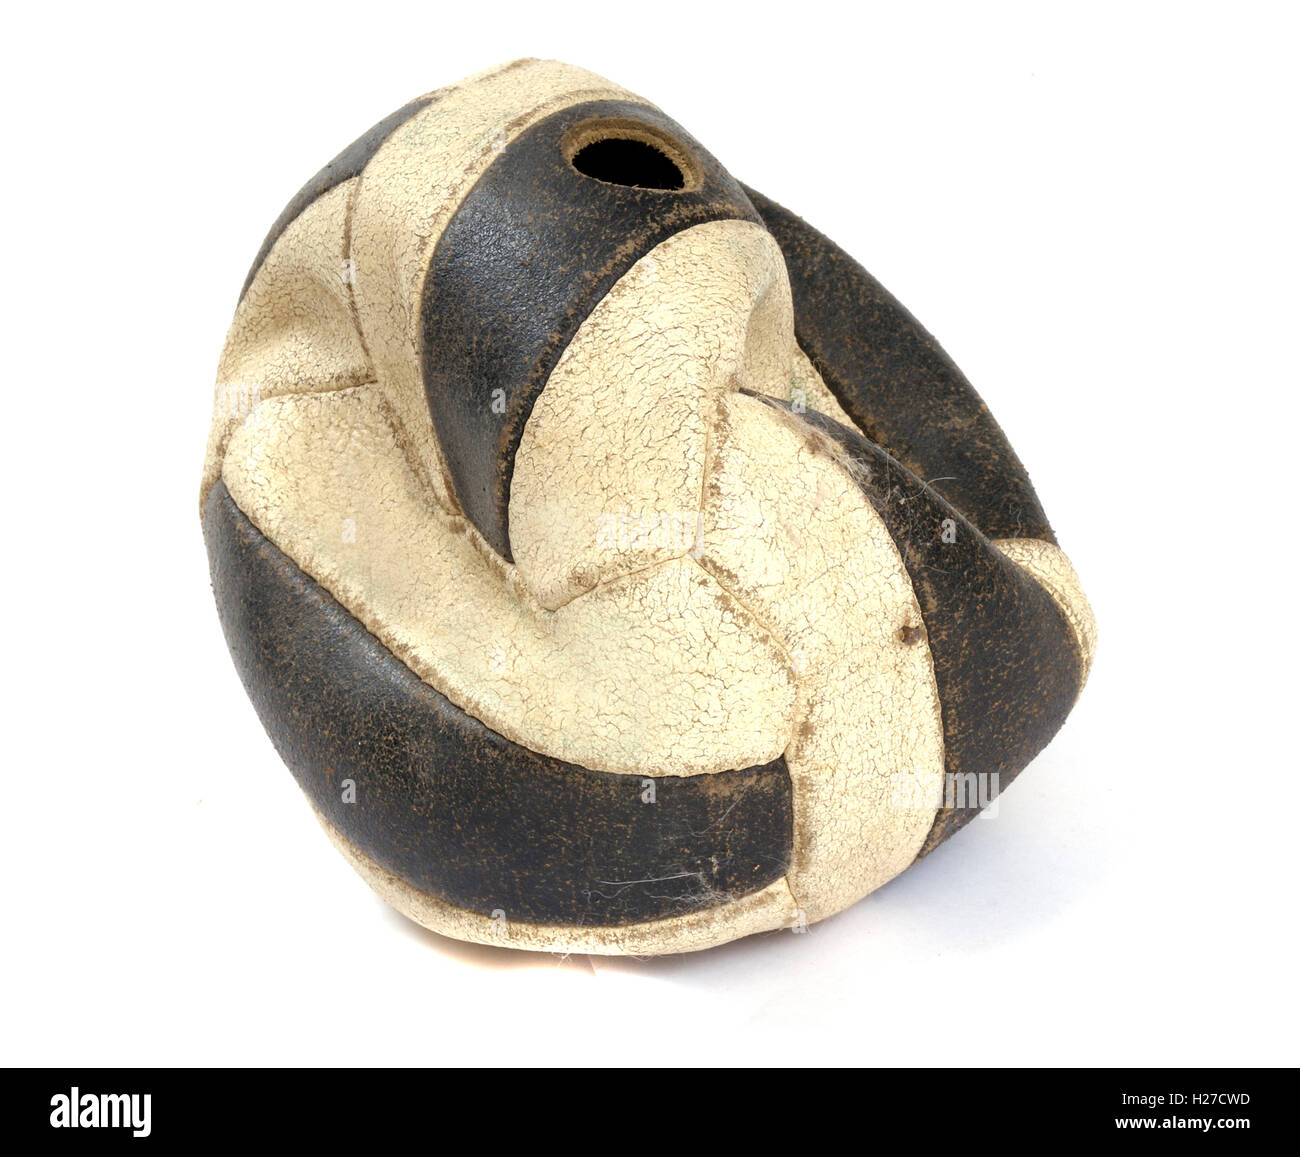 Old punctured leather black and white football. Stock Photo